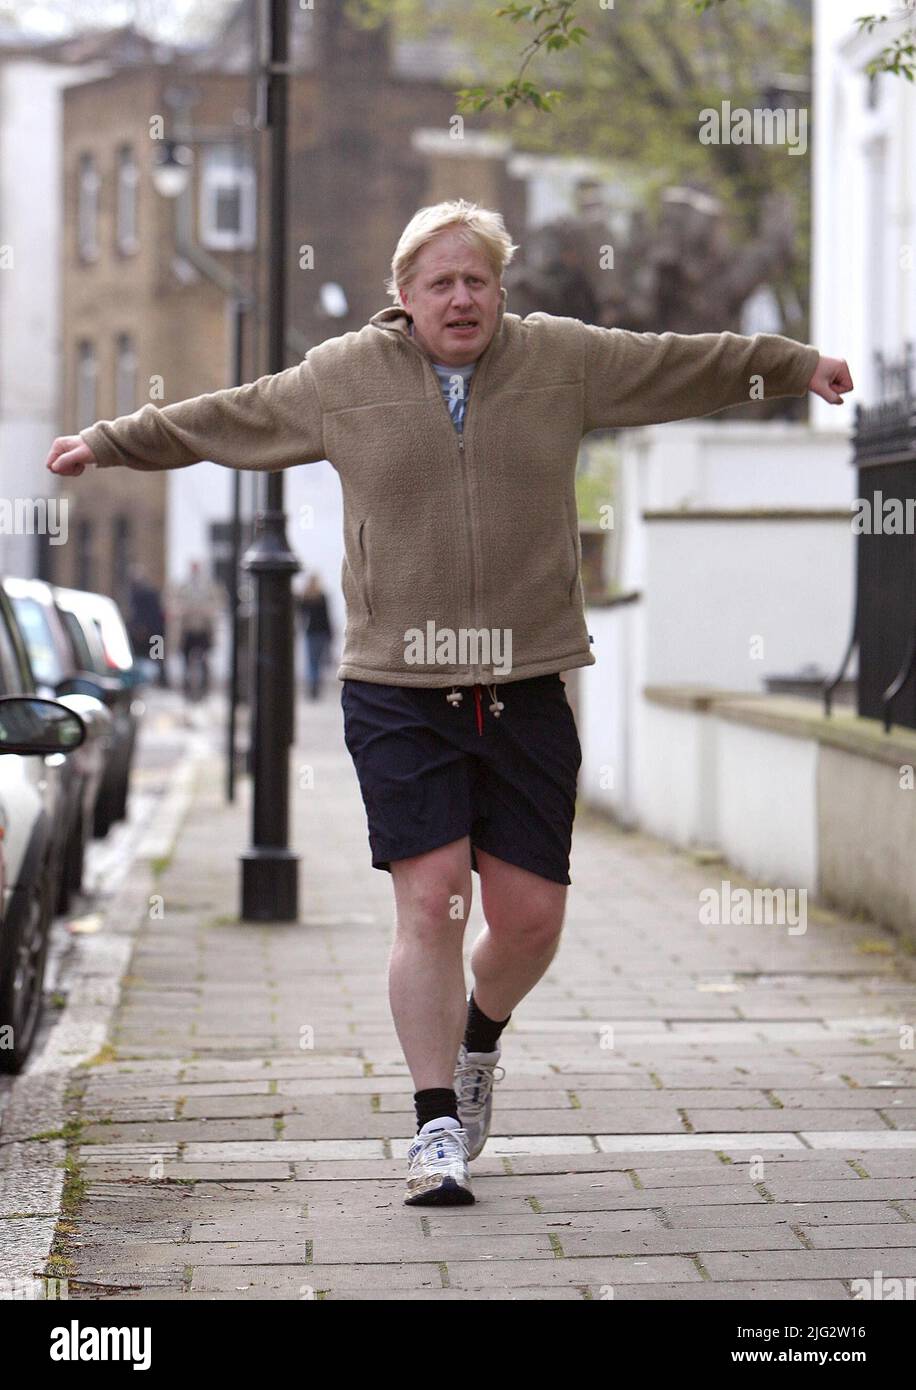 File photo dated 02/05/08 of London Mayoral candidate, Boris Johnson, out for a run in London while awaiting the results of the London Mayoral election. Boris Johnson will publicly announce his resignation later today, likely before lunchtime, the BBC is reporting. Issue date: Thursday July 7, 2022. Stock Photo